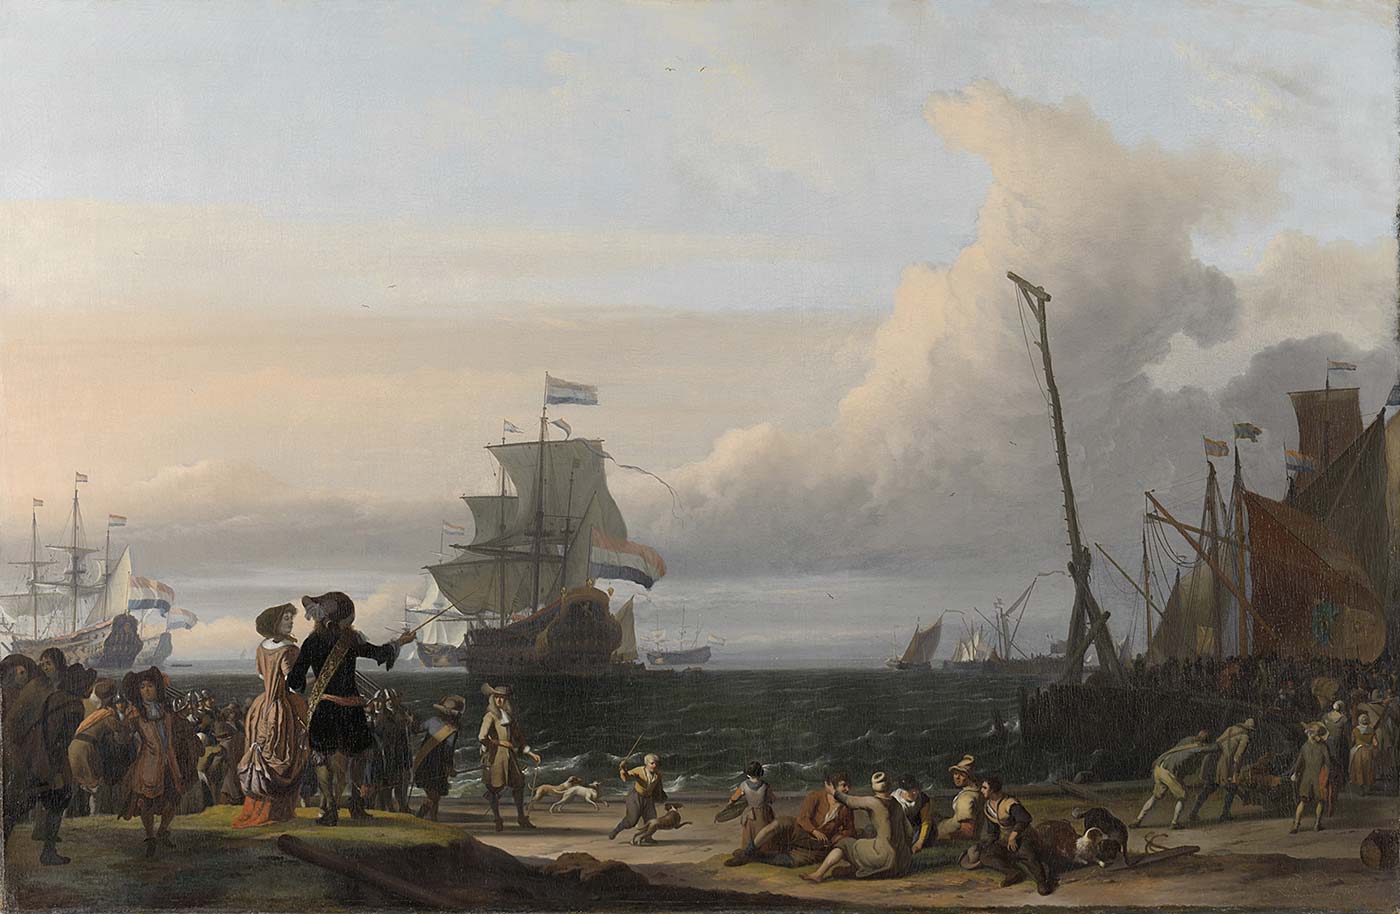 A ship in harbor, flying its flags. Ludolf Bakhuizen.